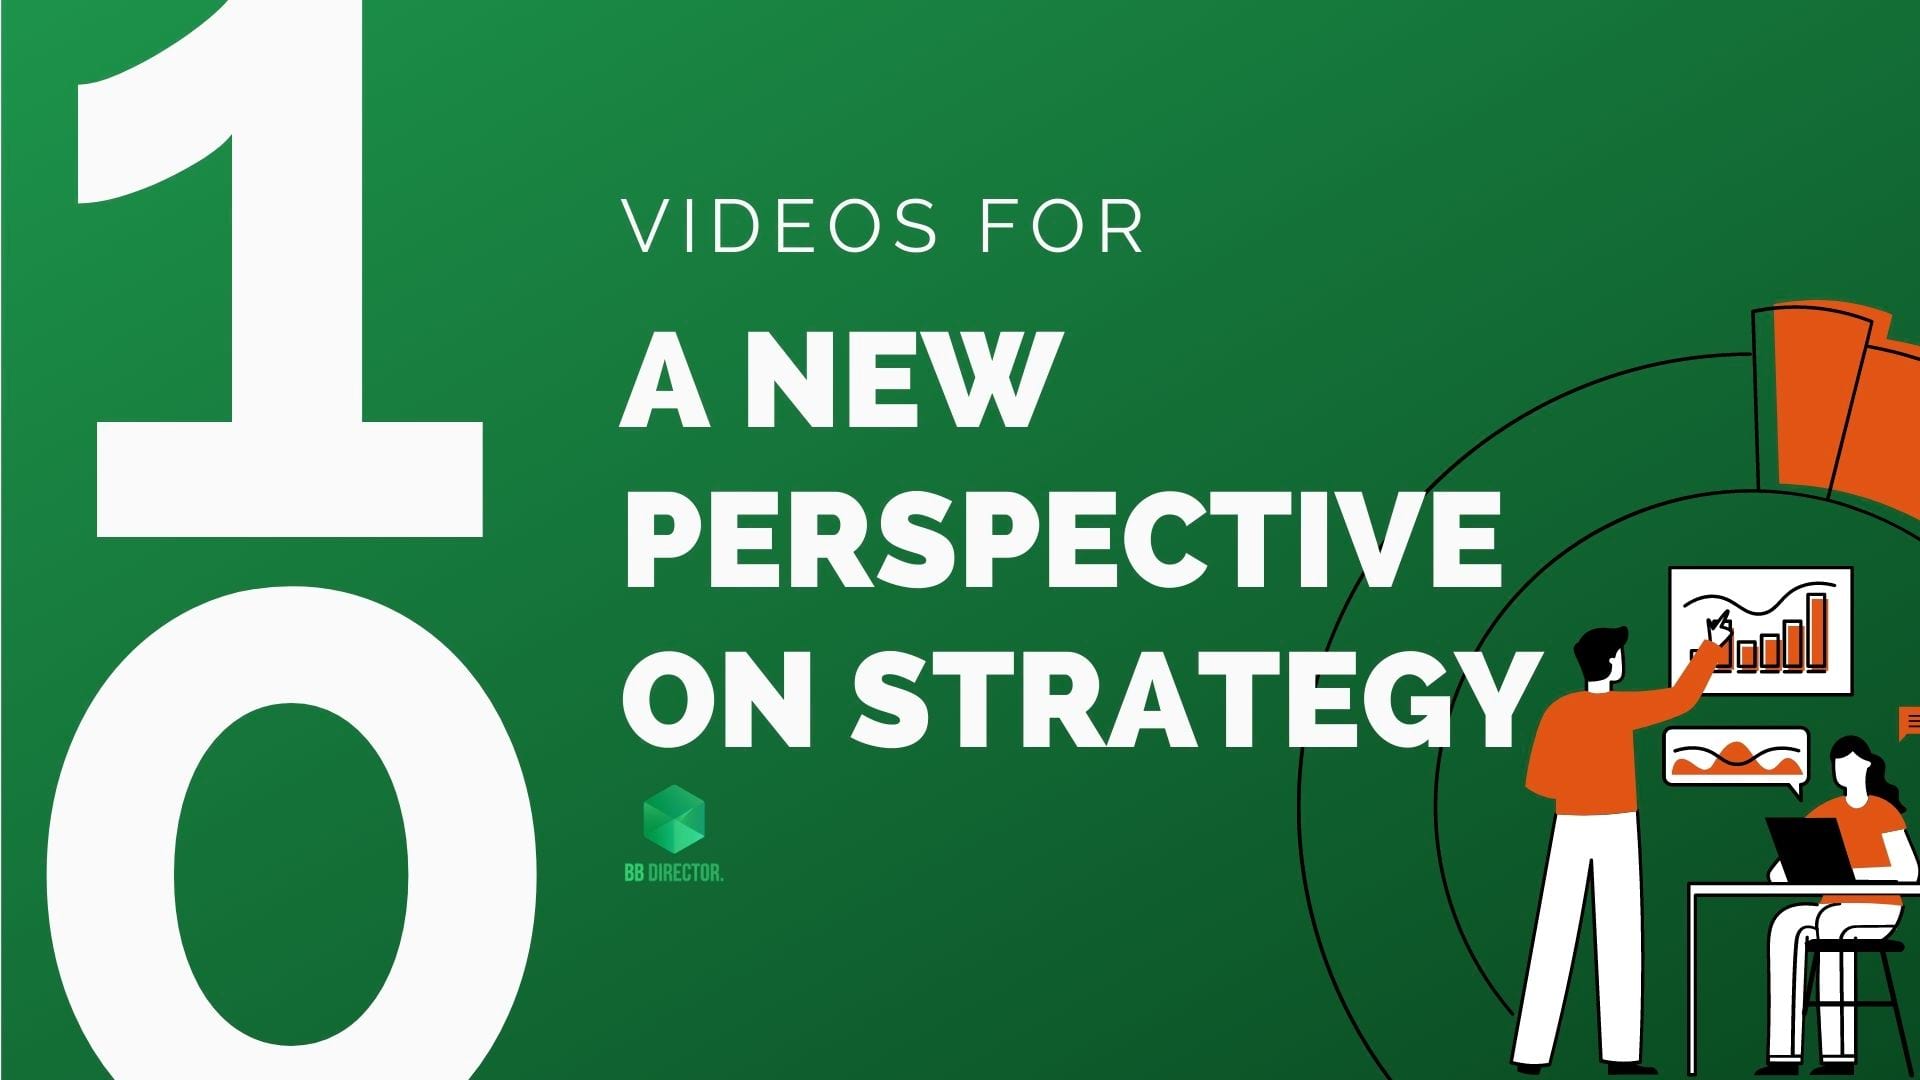 Videos for a new perspective on strategy